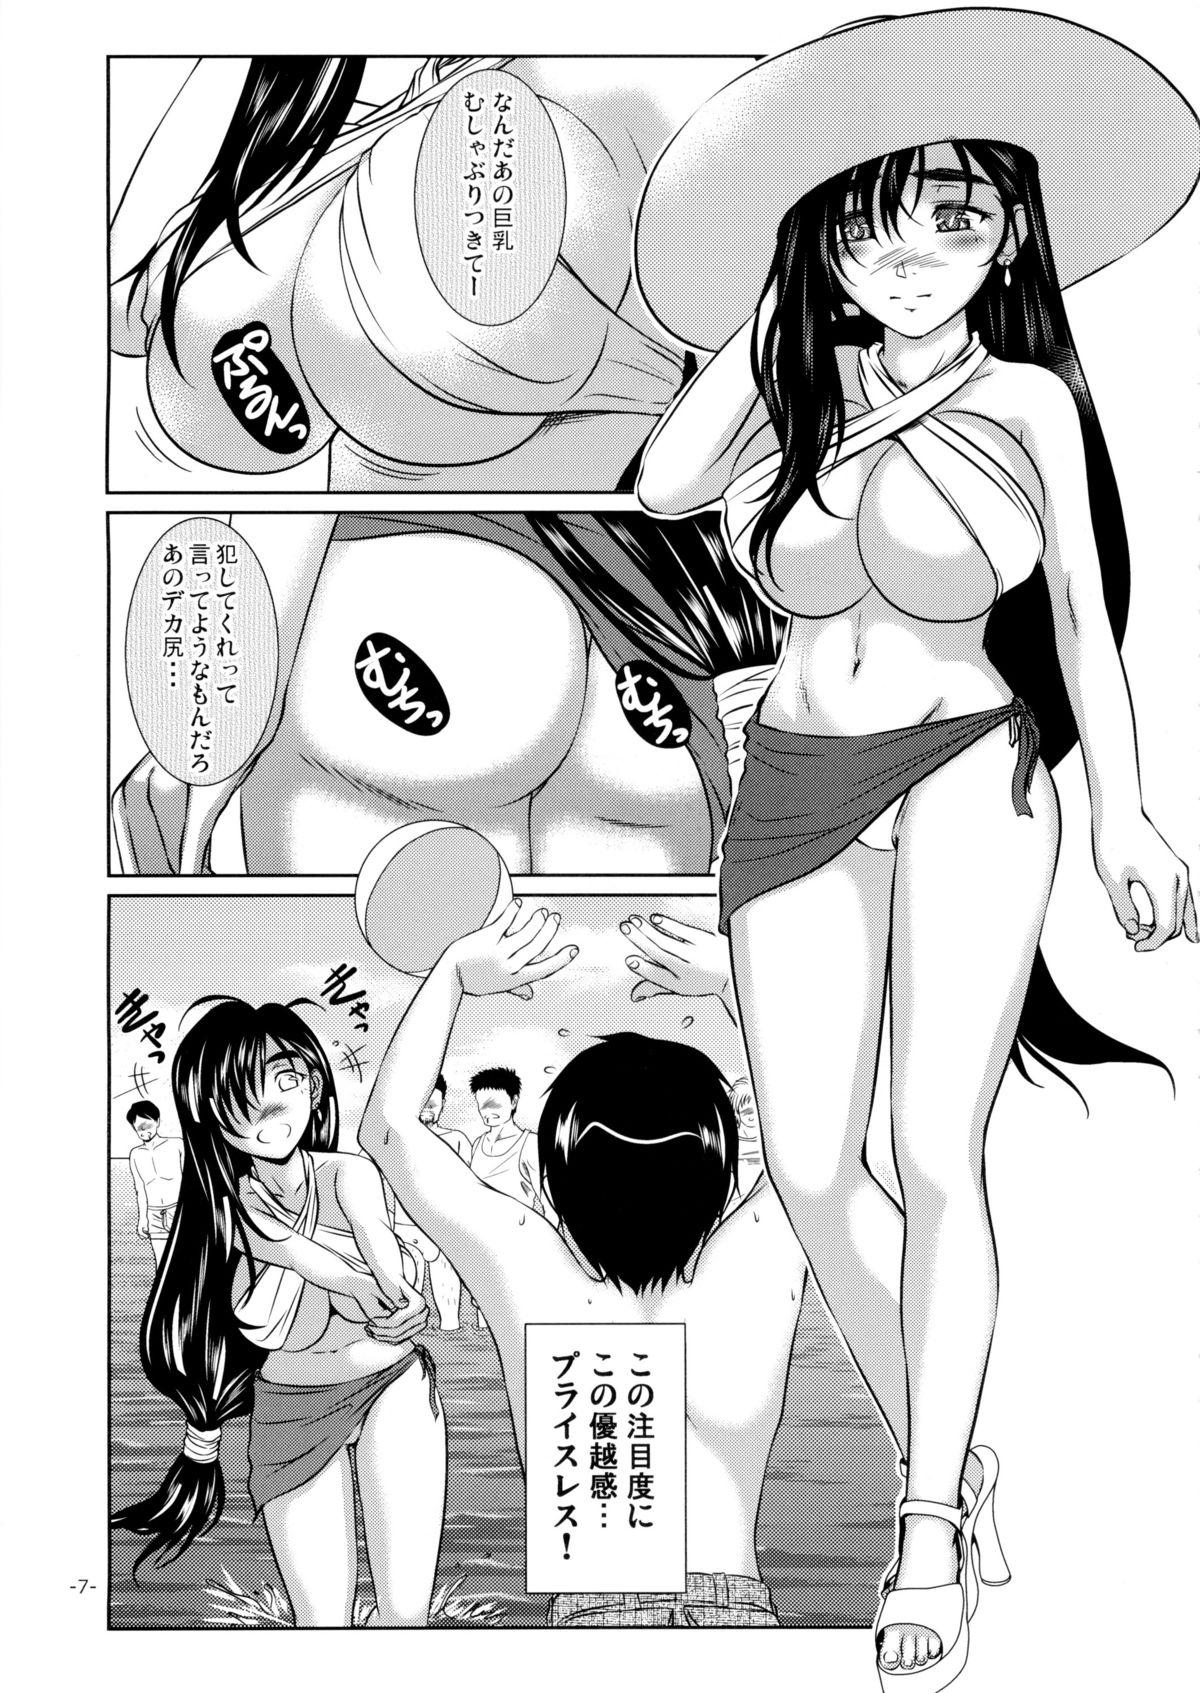 LET'S GO TO THE SEA WITH TIFA 6